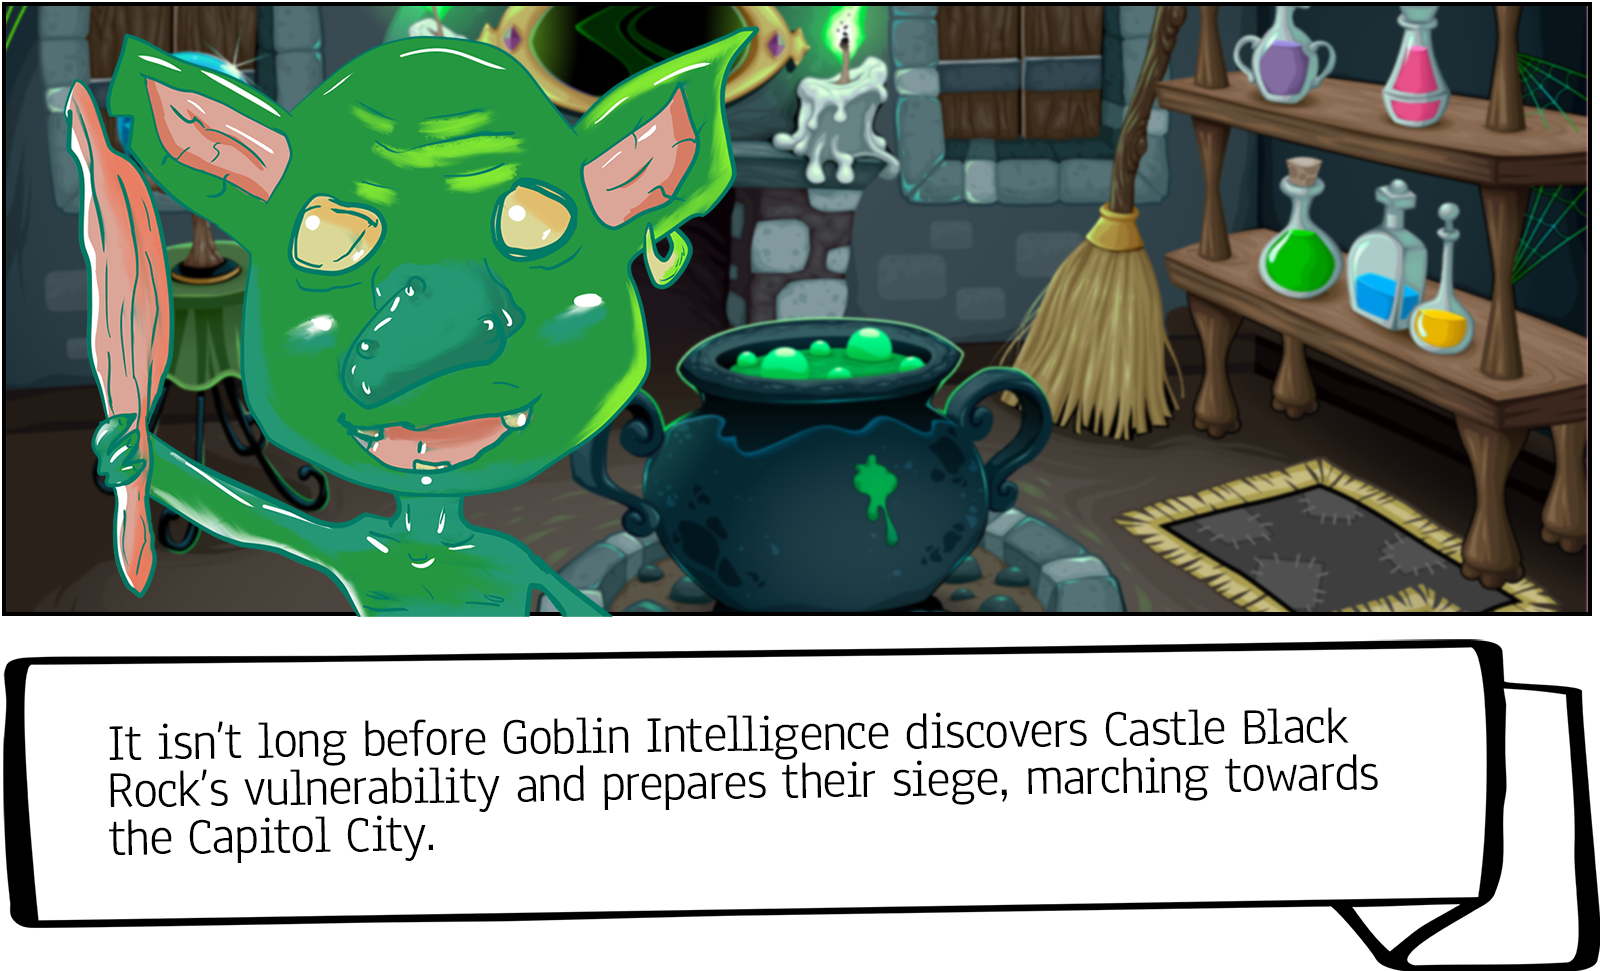 It isn’t long before Goblin Intelligence discovers Castle Black Rock’s vulnerability and prepares their siege, marching towards the Capitol City.